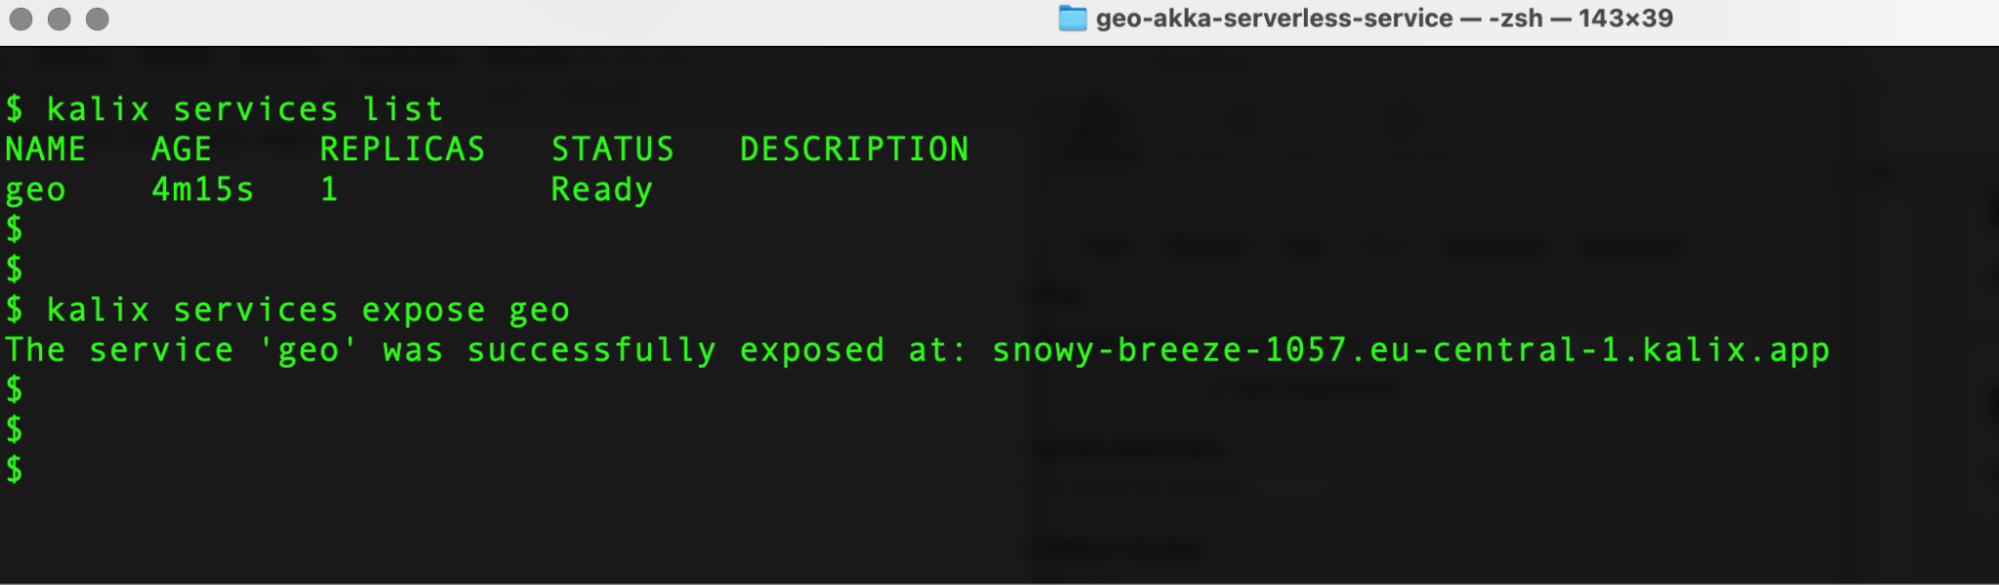 Real-Time Weather Alerting with Kalix